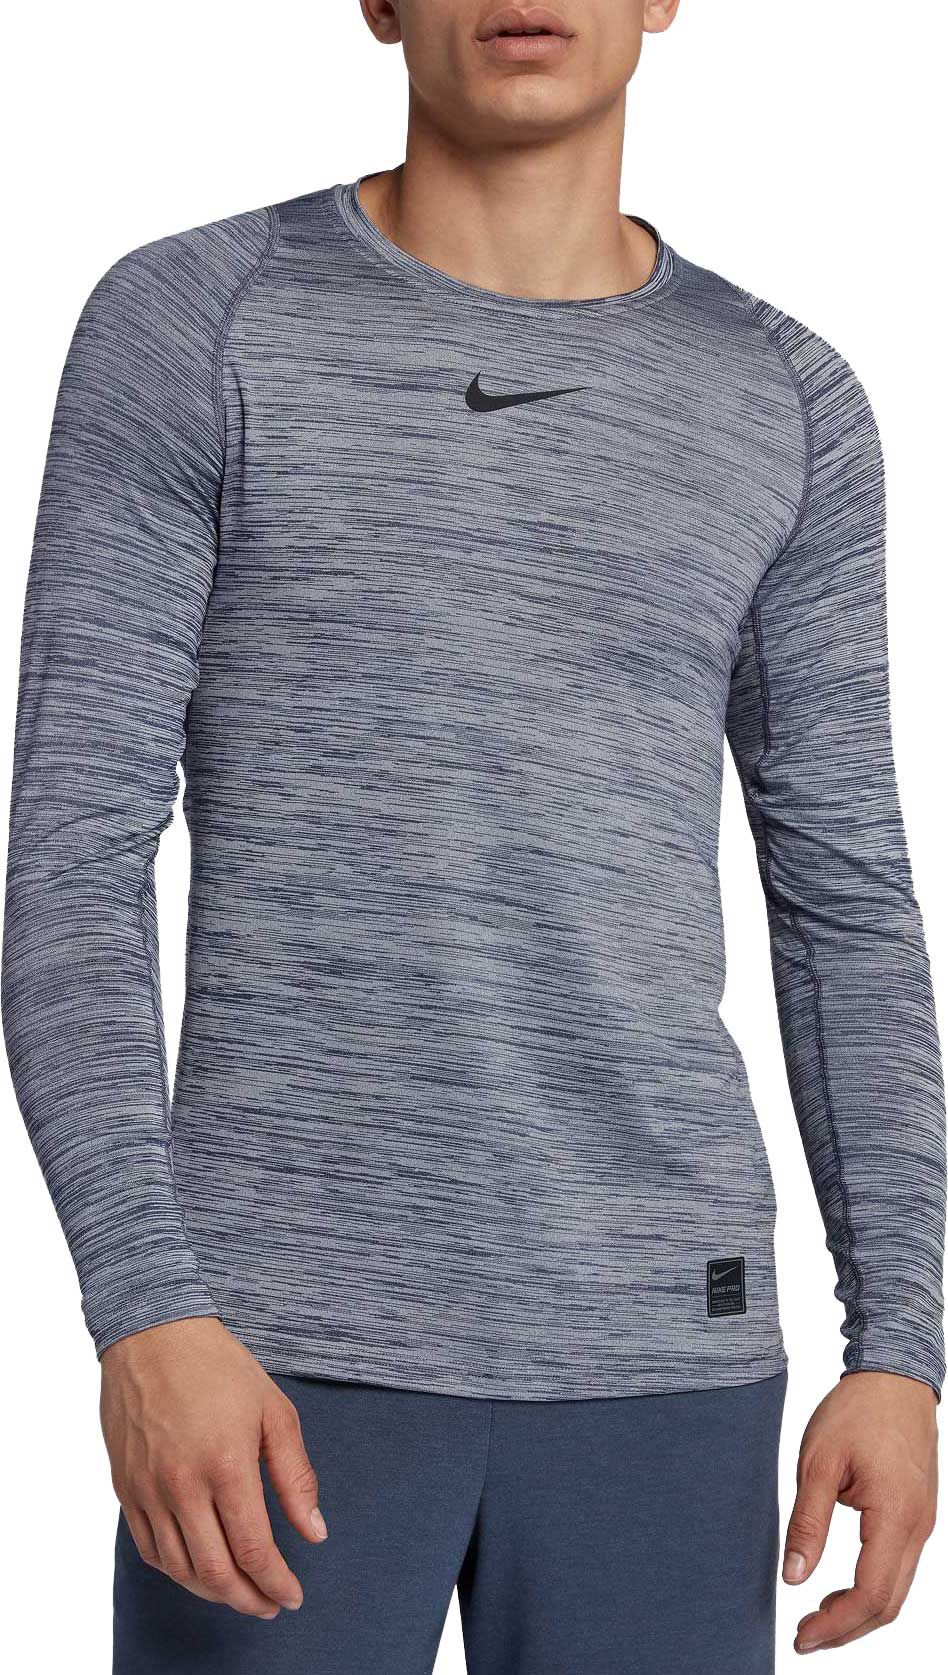 nike pro cool fitted long sleeve